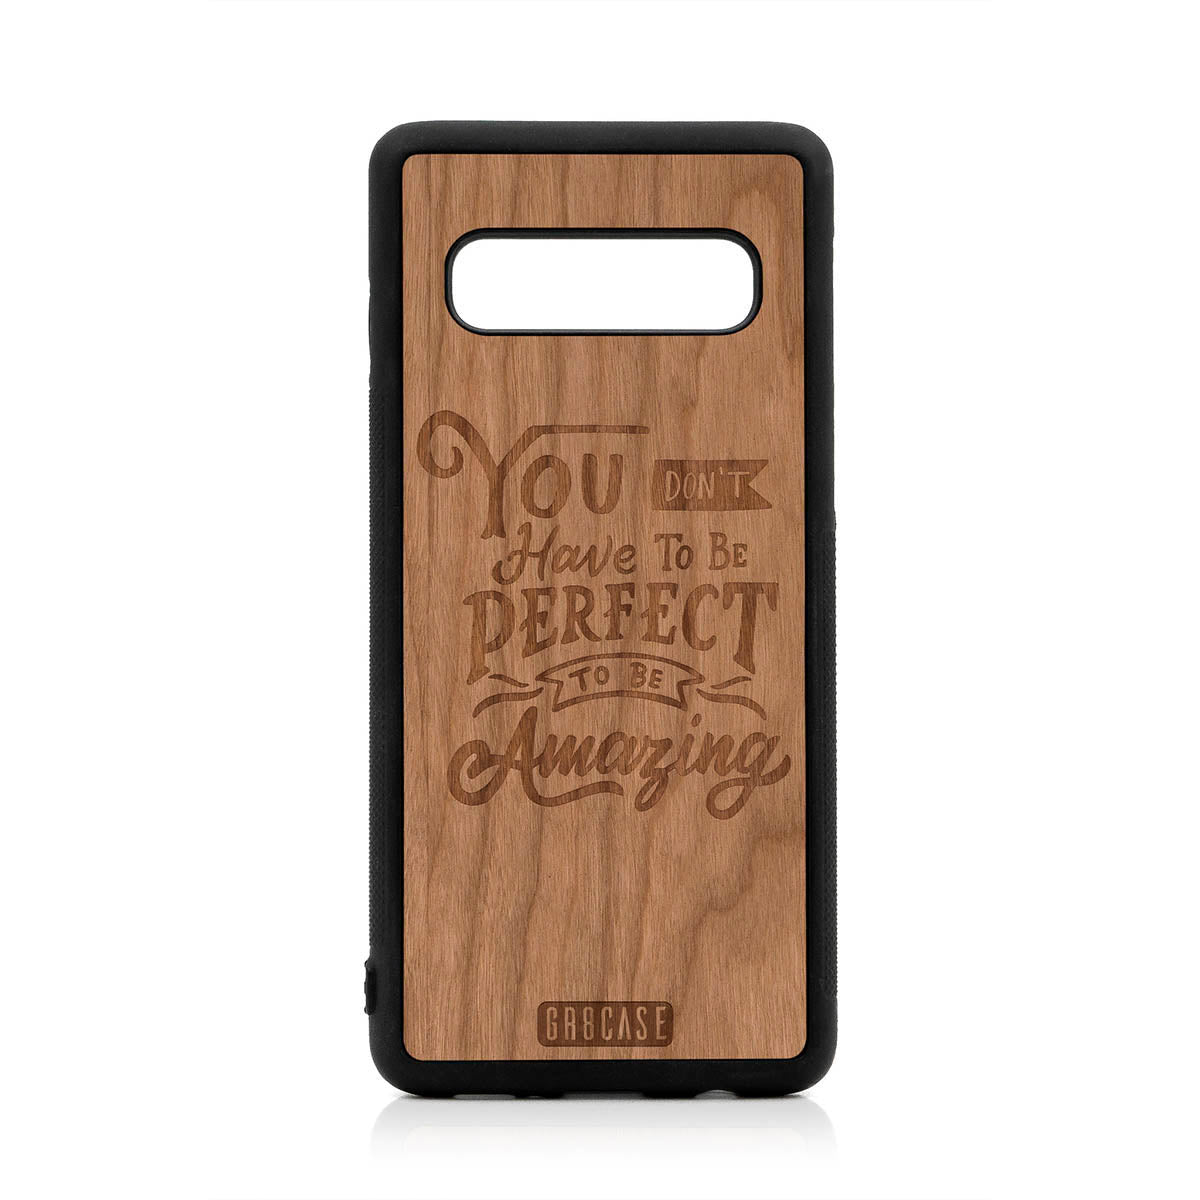 You Don't Have To Be Perfect To Be Amazing Design Wood Case For Samsung Galaxy S10